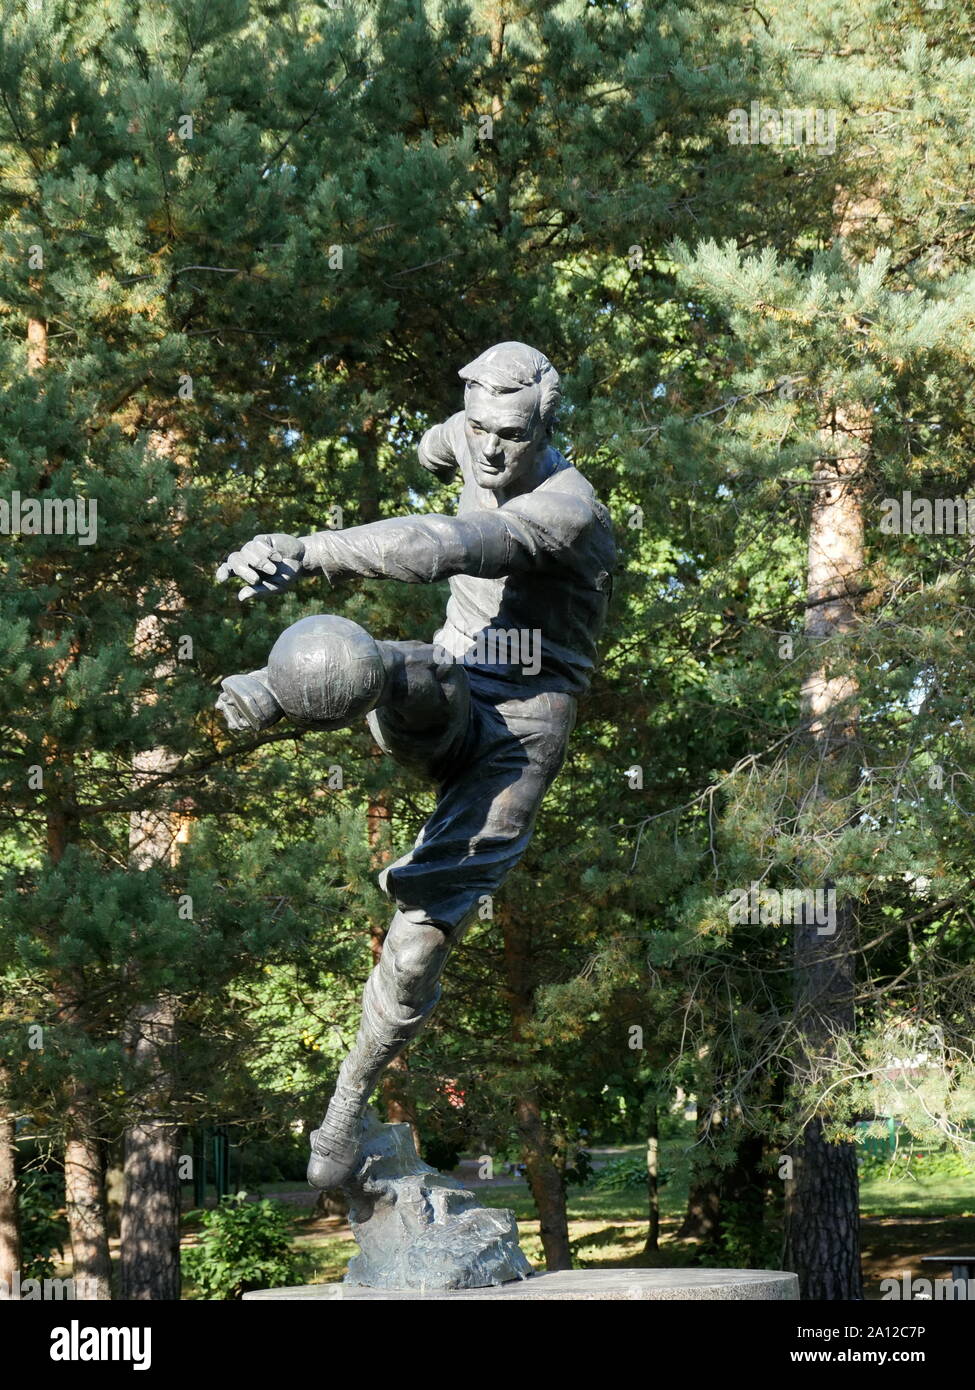 St. Petersburg, Russia, August 27, 2019 Monument to the football player Vsevolod Bobrov, soccer player kick  ball in motion Stock Photo